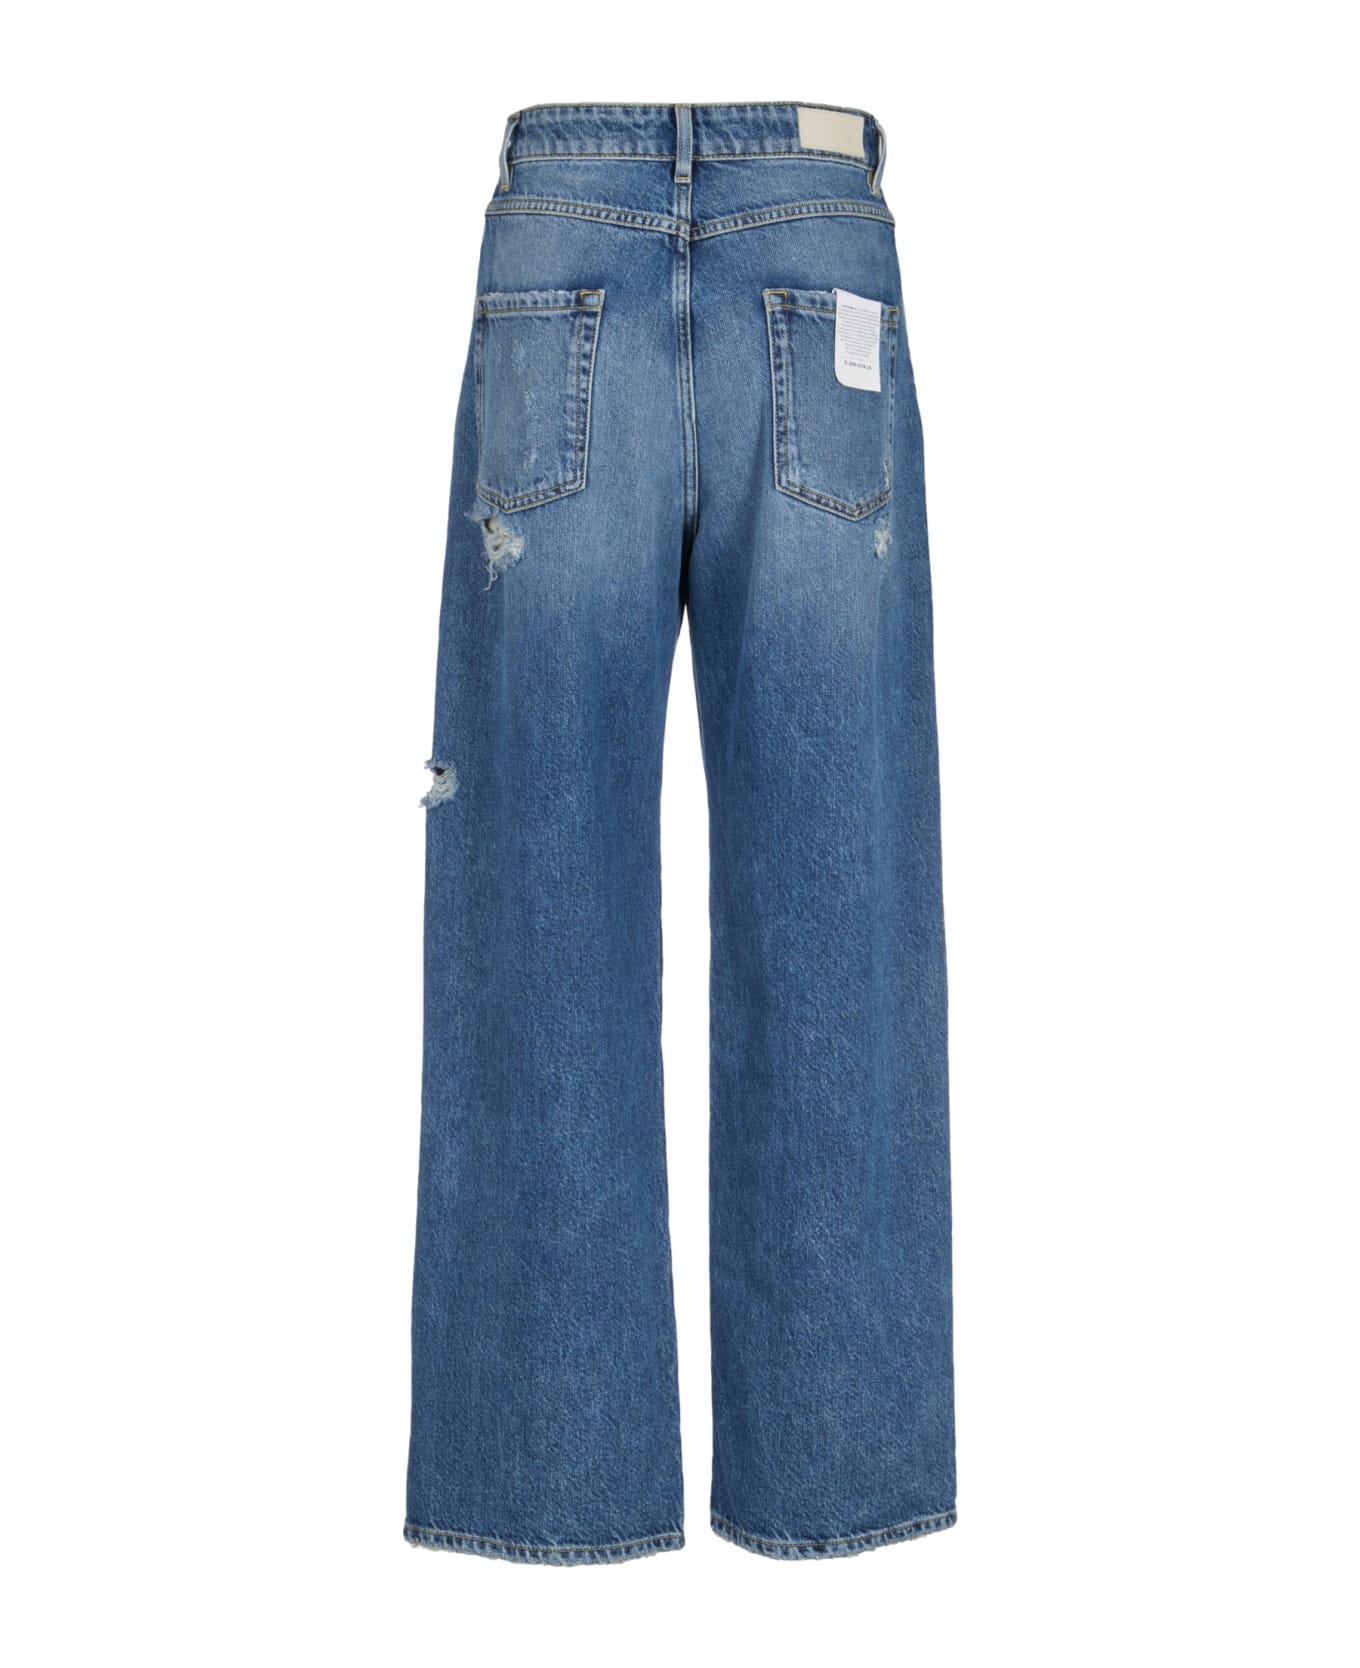 Icon Denim Straight Buttoned Jeans - Mid Blue デニム